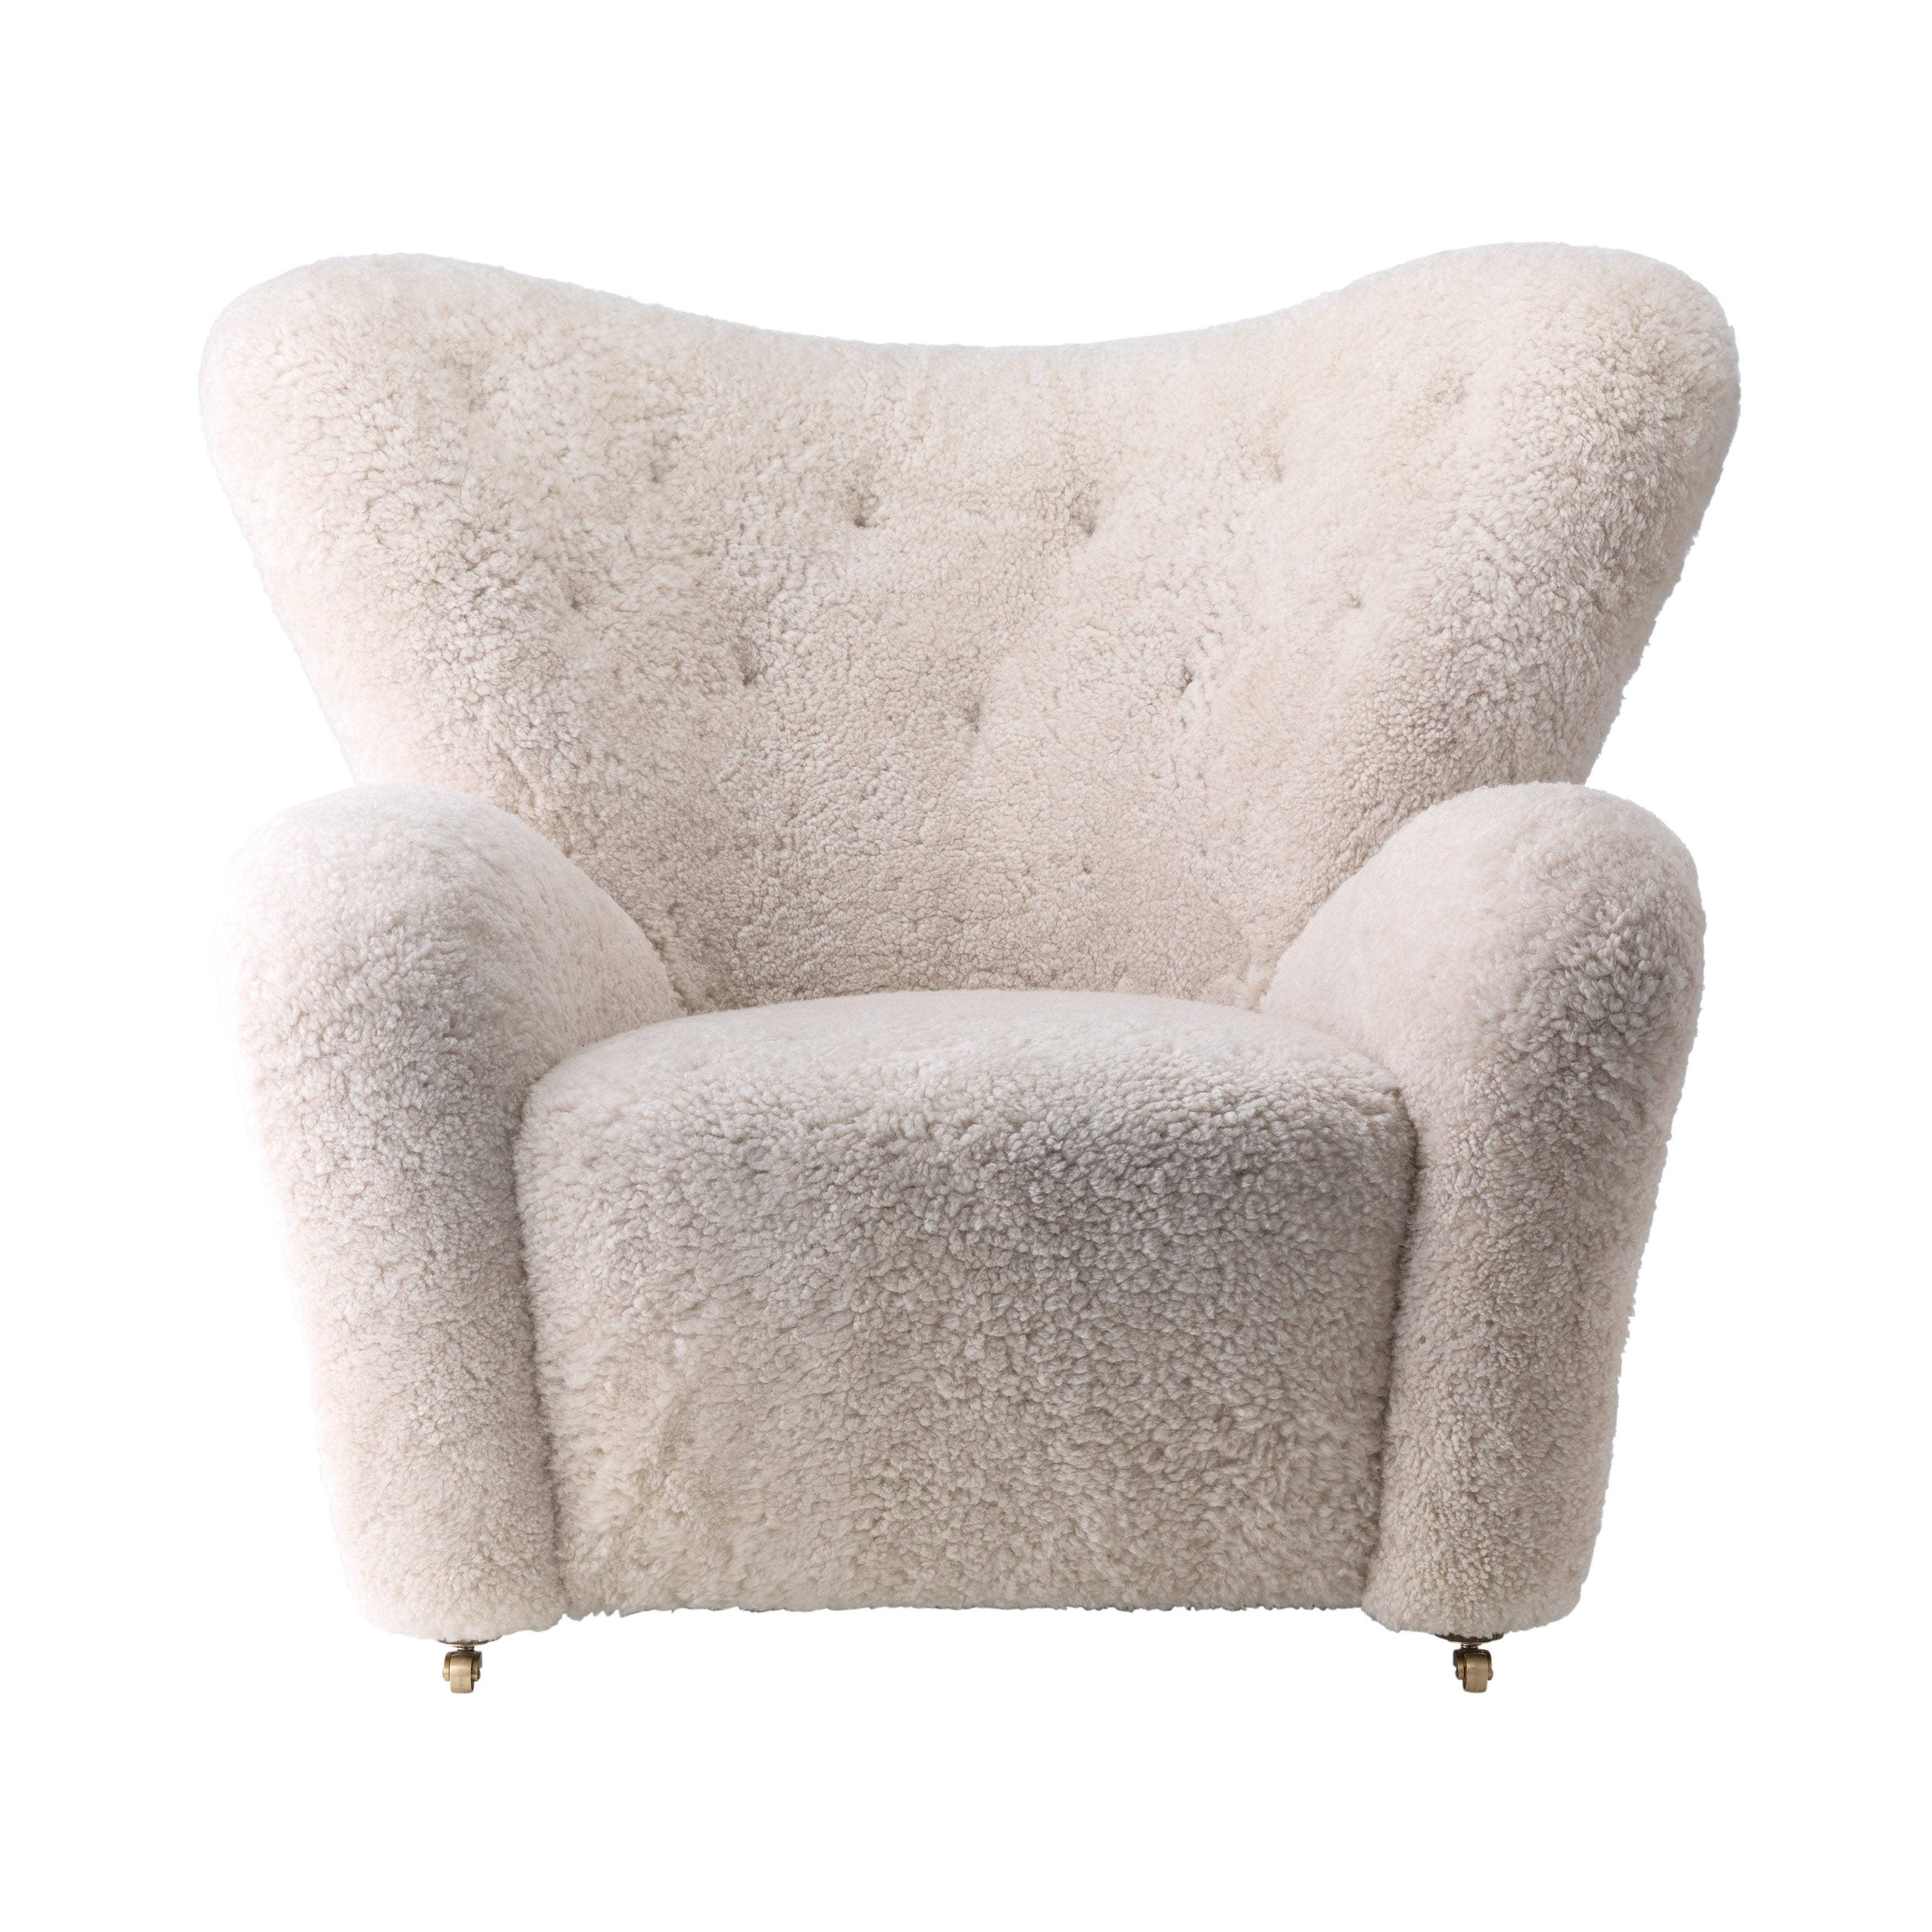 The Tired Man Lounge Chair: Without Footstool + Sheepskin Moonlight